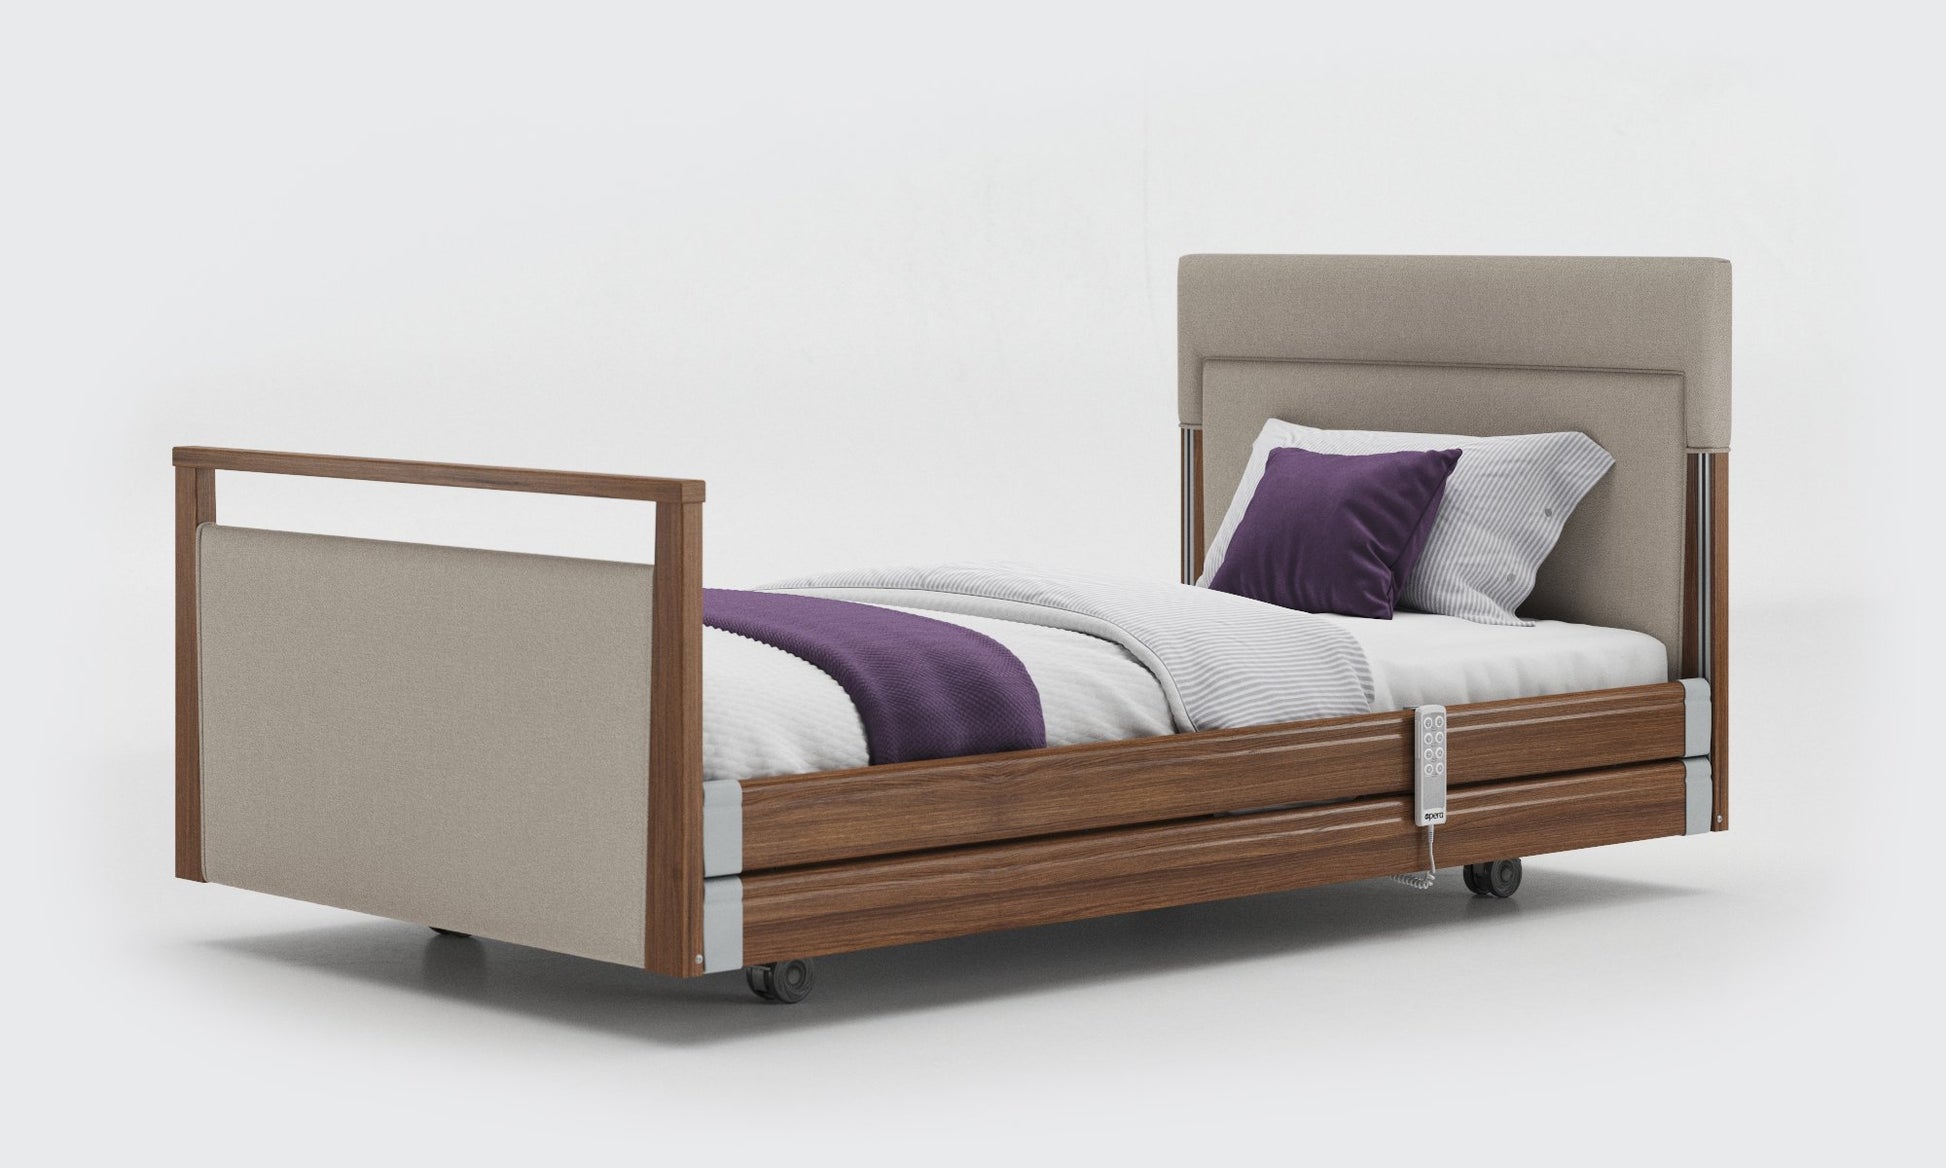 Signature bed upholstered 3ft6 with rails in walnut in Linen fabric